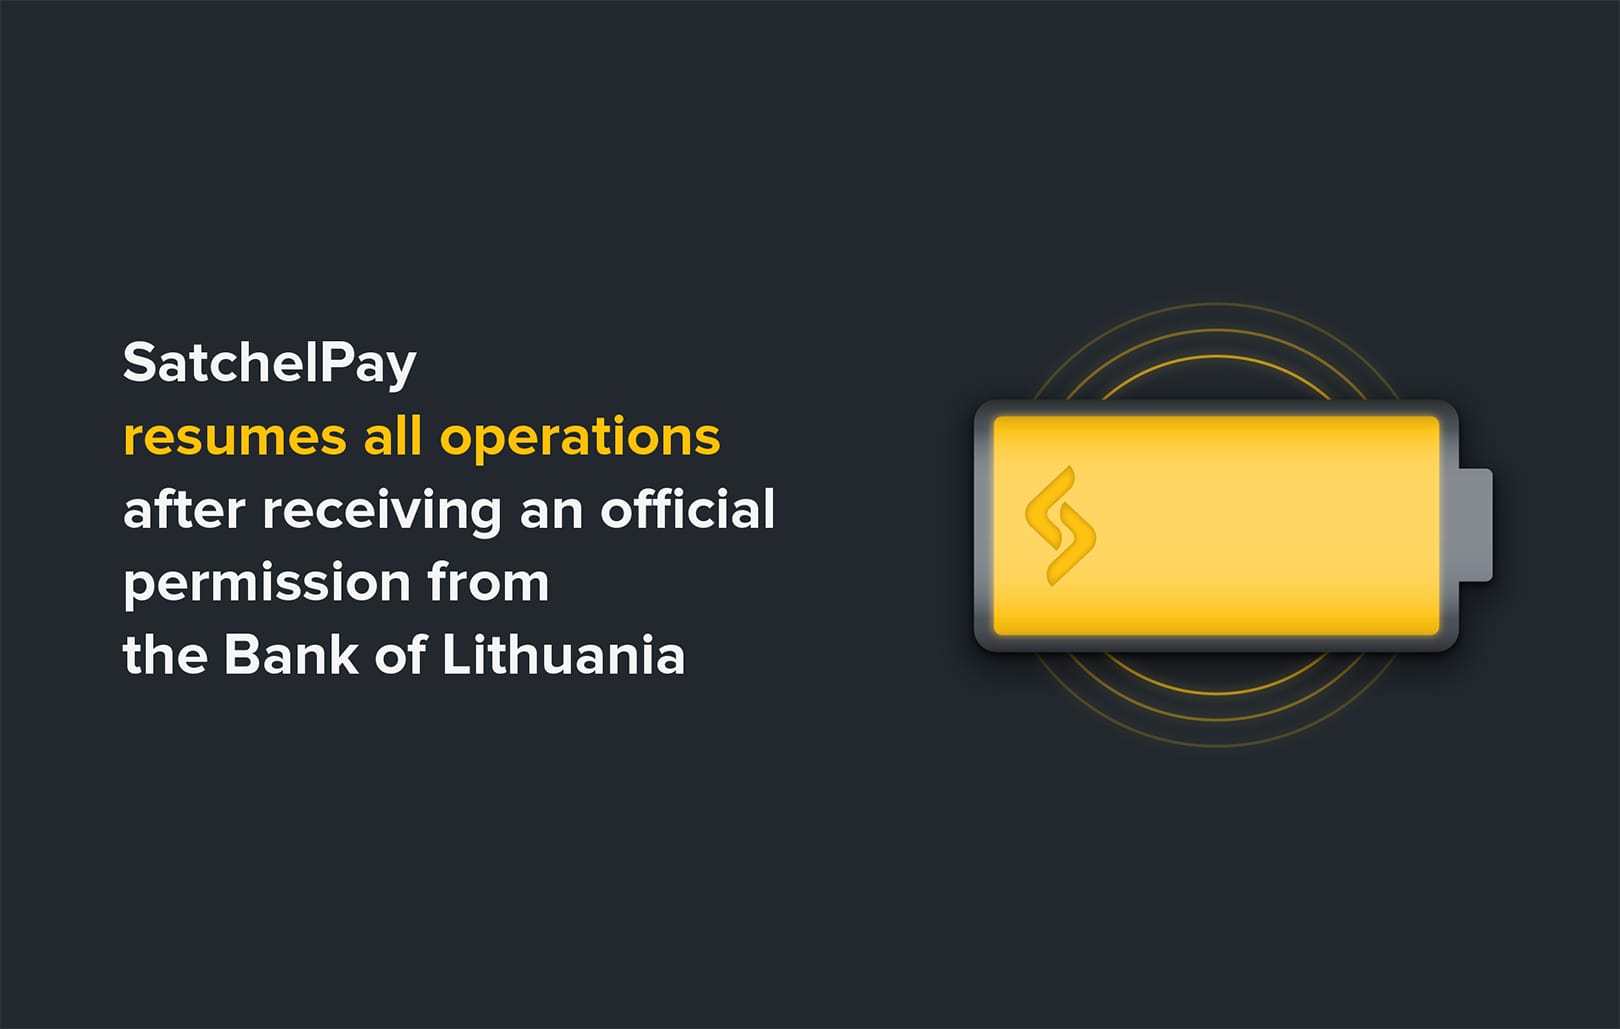 SatchelPay resumes all operations after receiving an official permission from the Bank of Lithuania